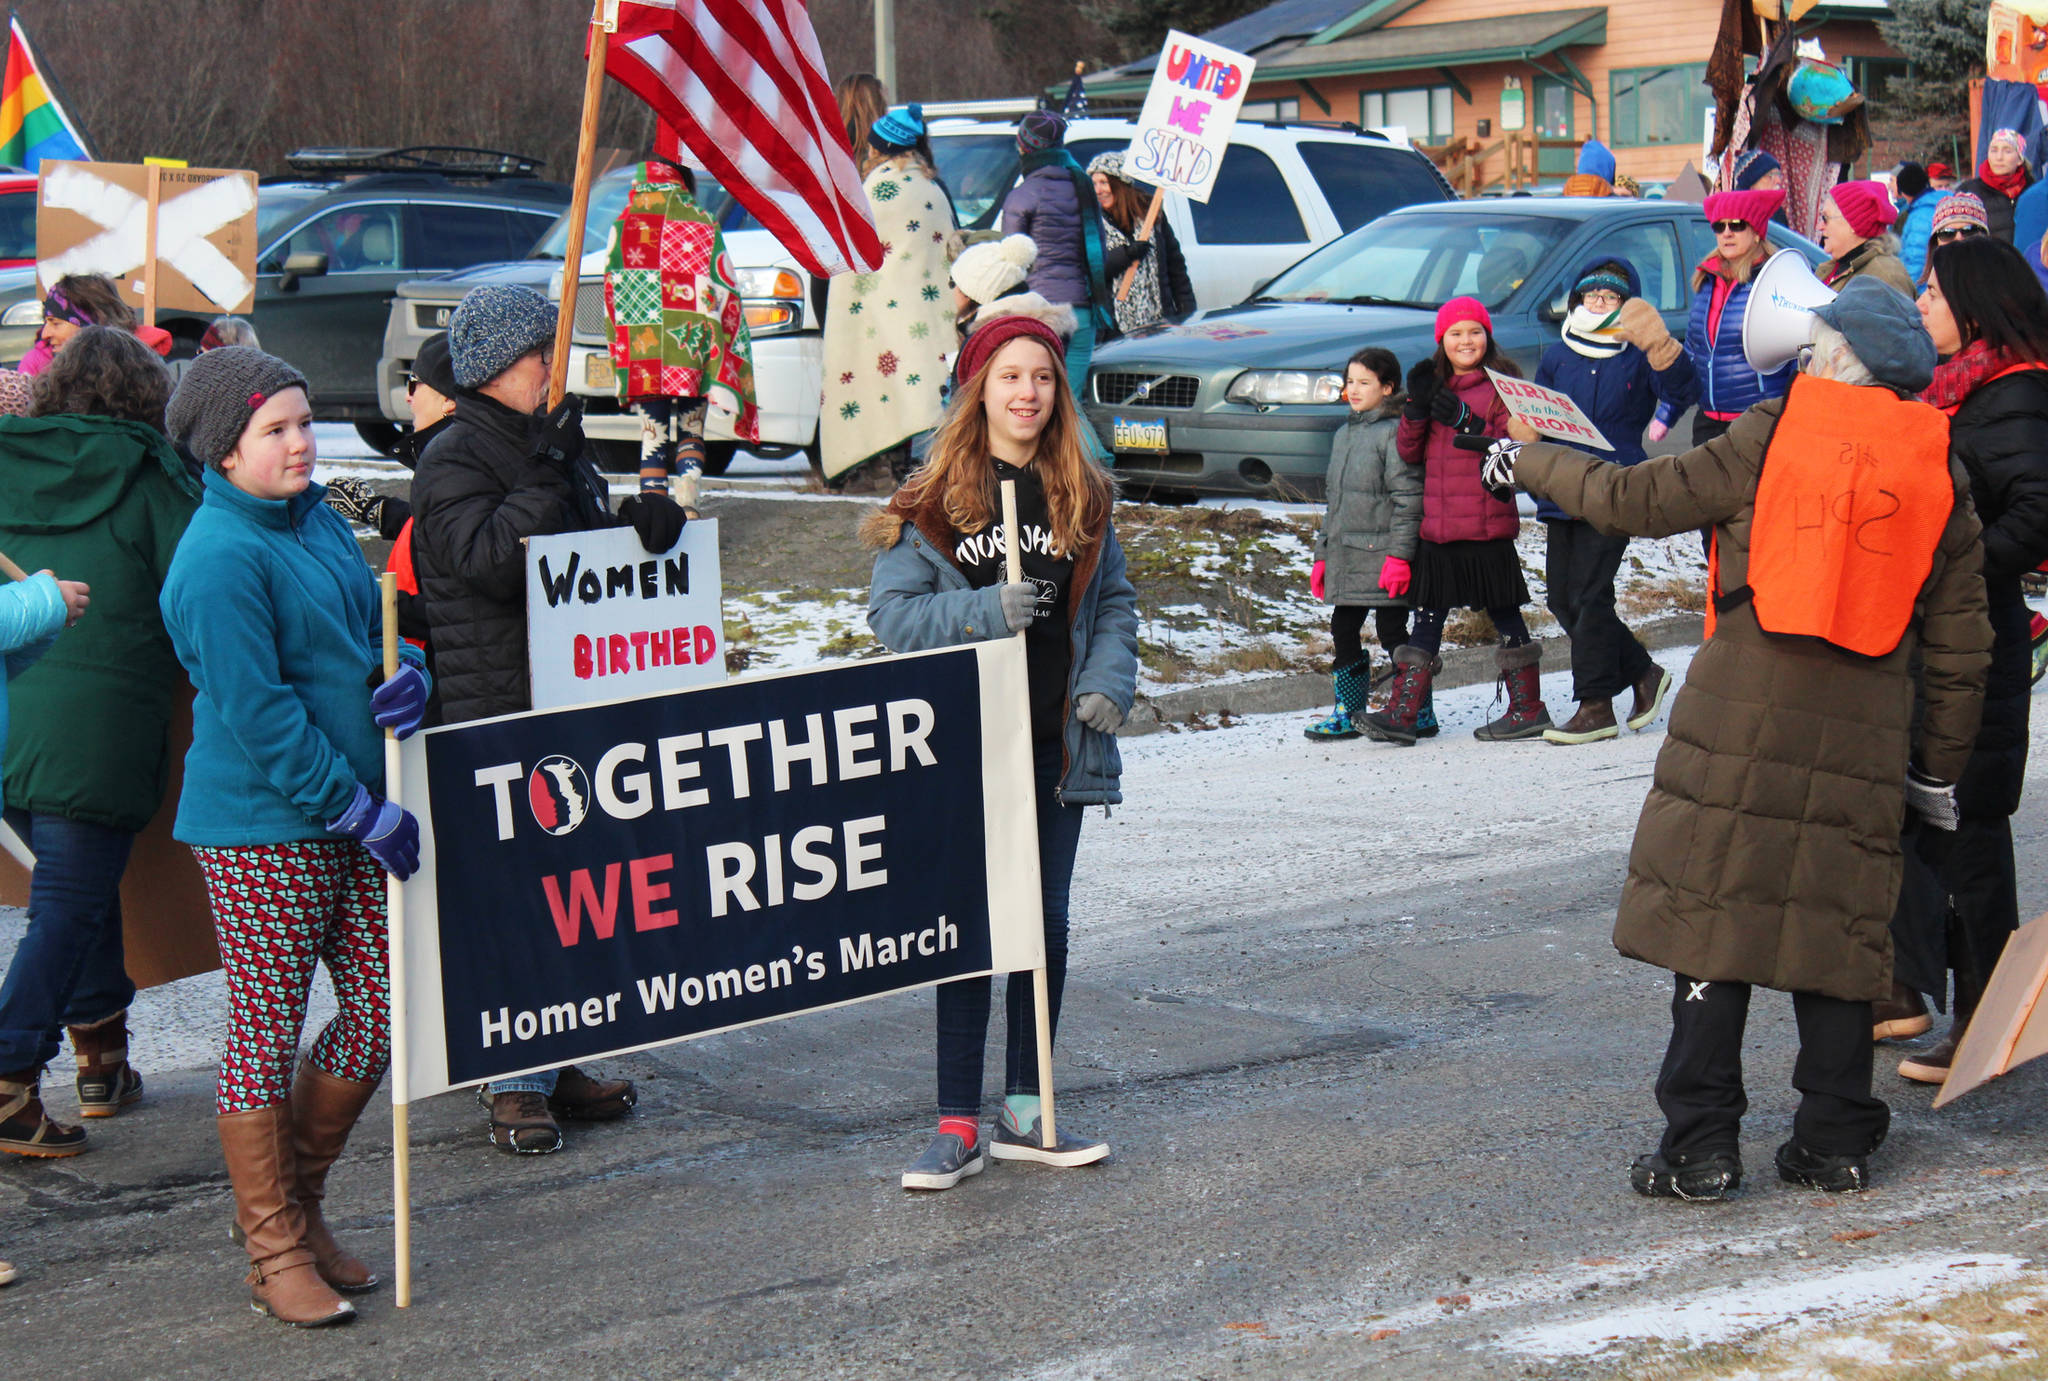 West Homer Elementary students Caitlin Smith (left) and Gillian Bremicker prepare to lead the Women’s March on Homer 2018 out of the HERC parking lot and down Pioneer Avenue on Saturday, Jan. 20, 2018 in Homer, Alaska. The pair said they asked for a sign to carry and were surprised and excited to be offered the lead banner. (Photo by Megan Pacer/Homer News)